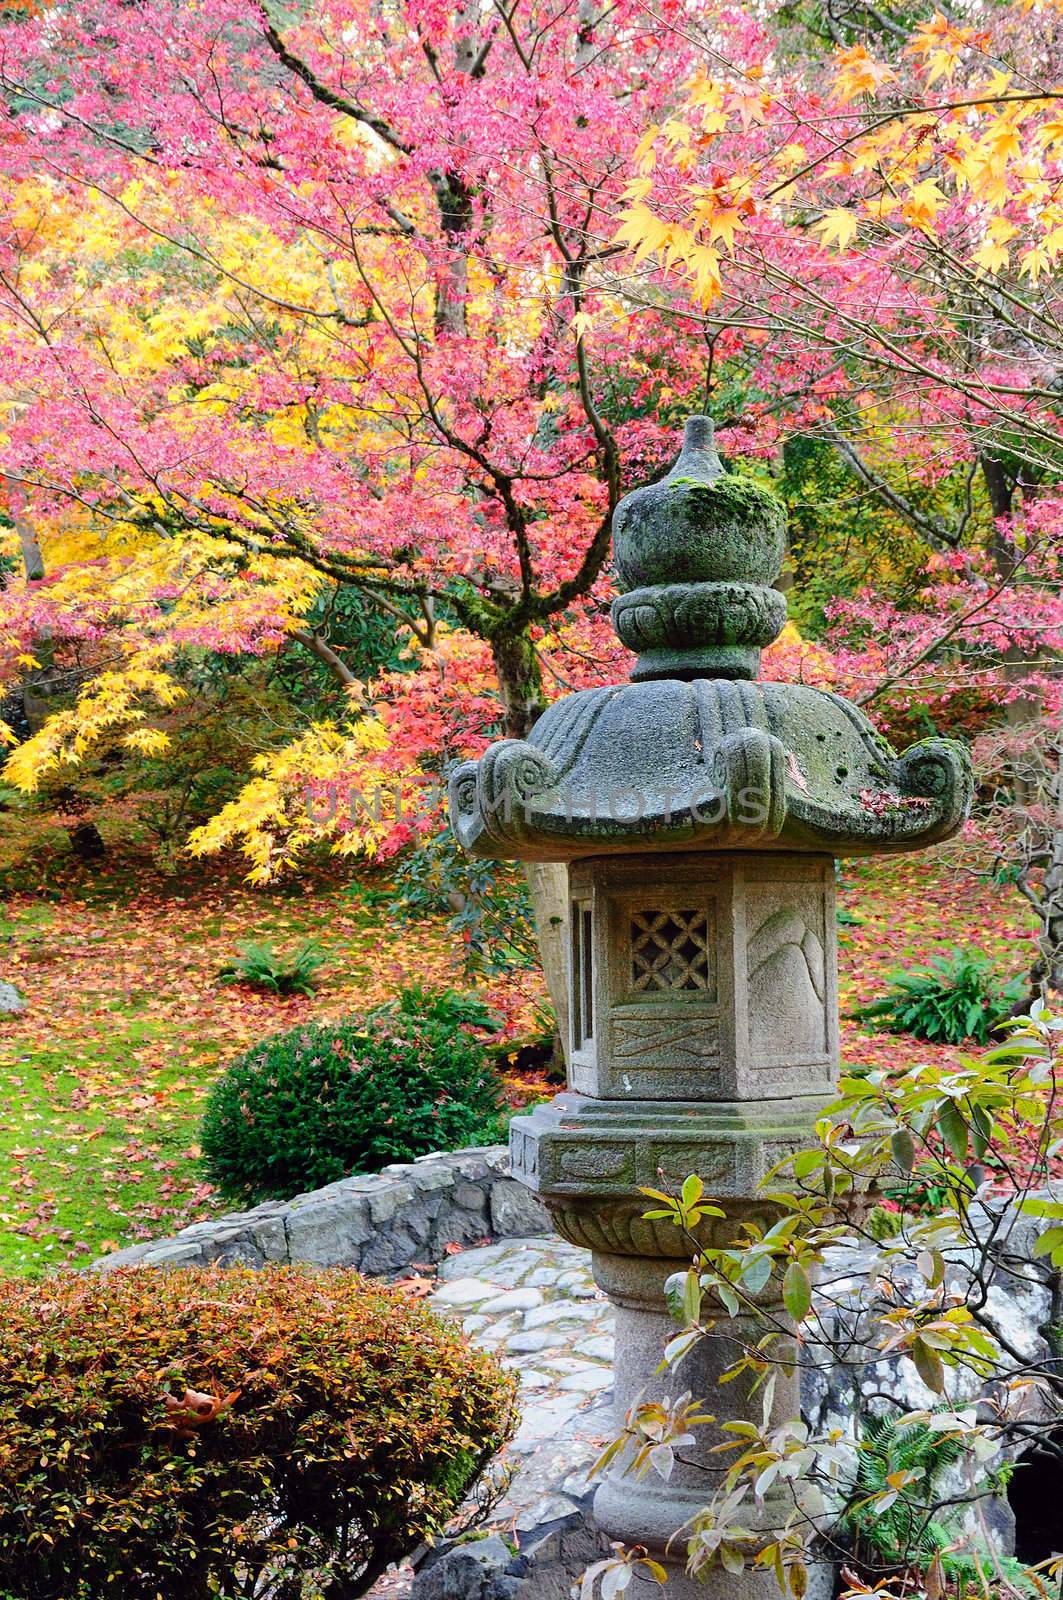 Pretty Japanese architecture design in garden with fall colors